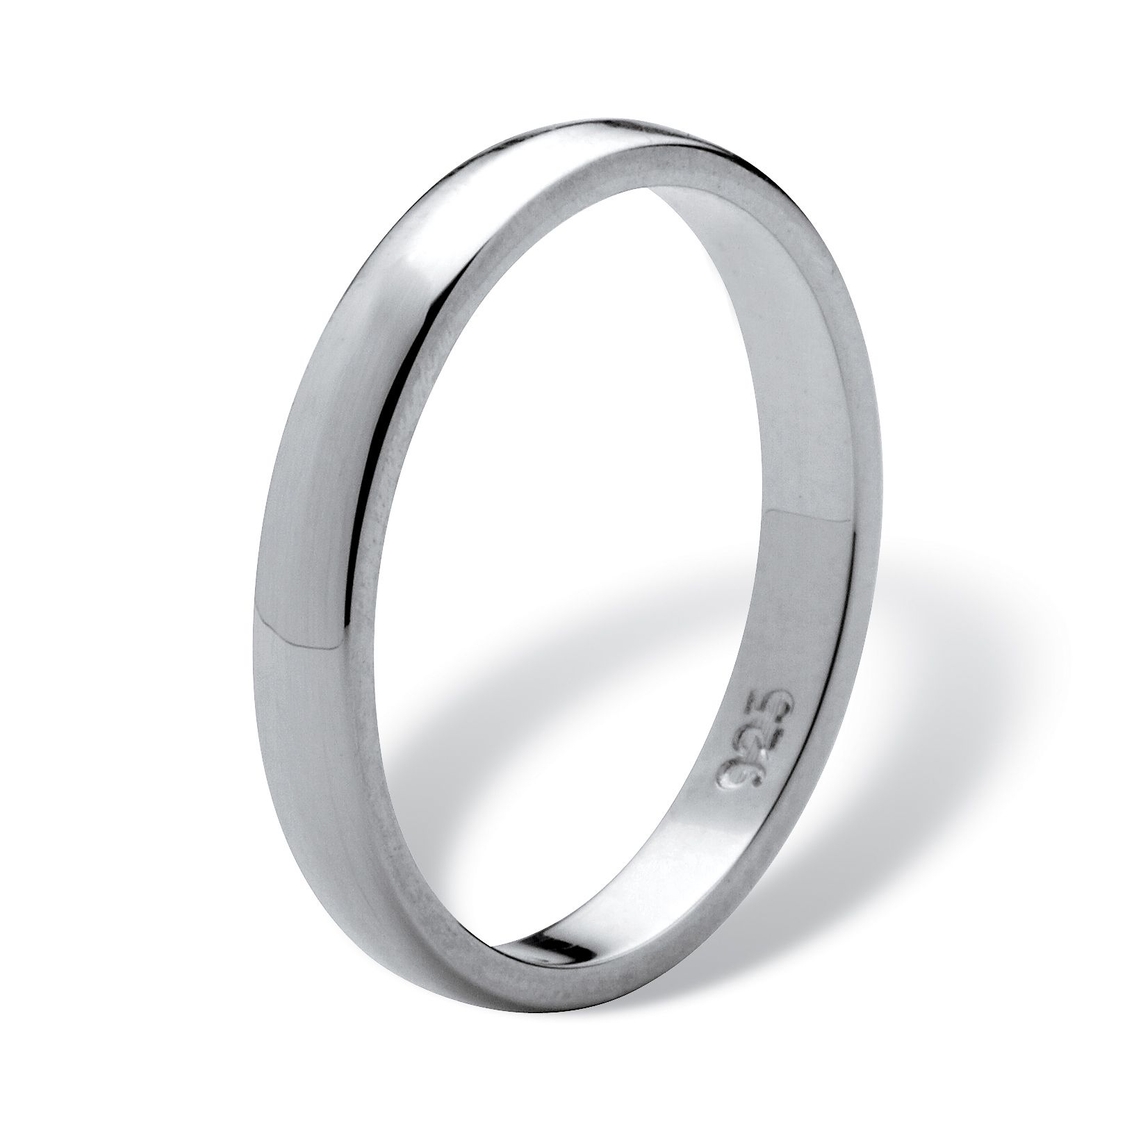 Polished Wedding Ring in Sterling Silver (2.5mm) - Image 2 of 5